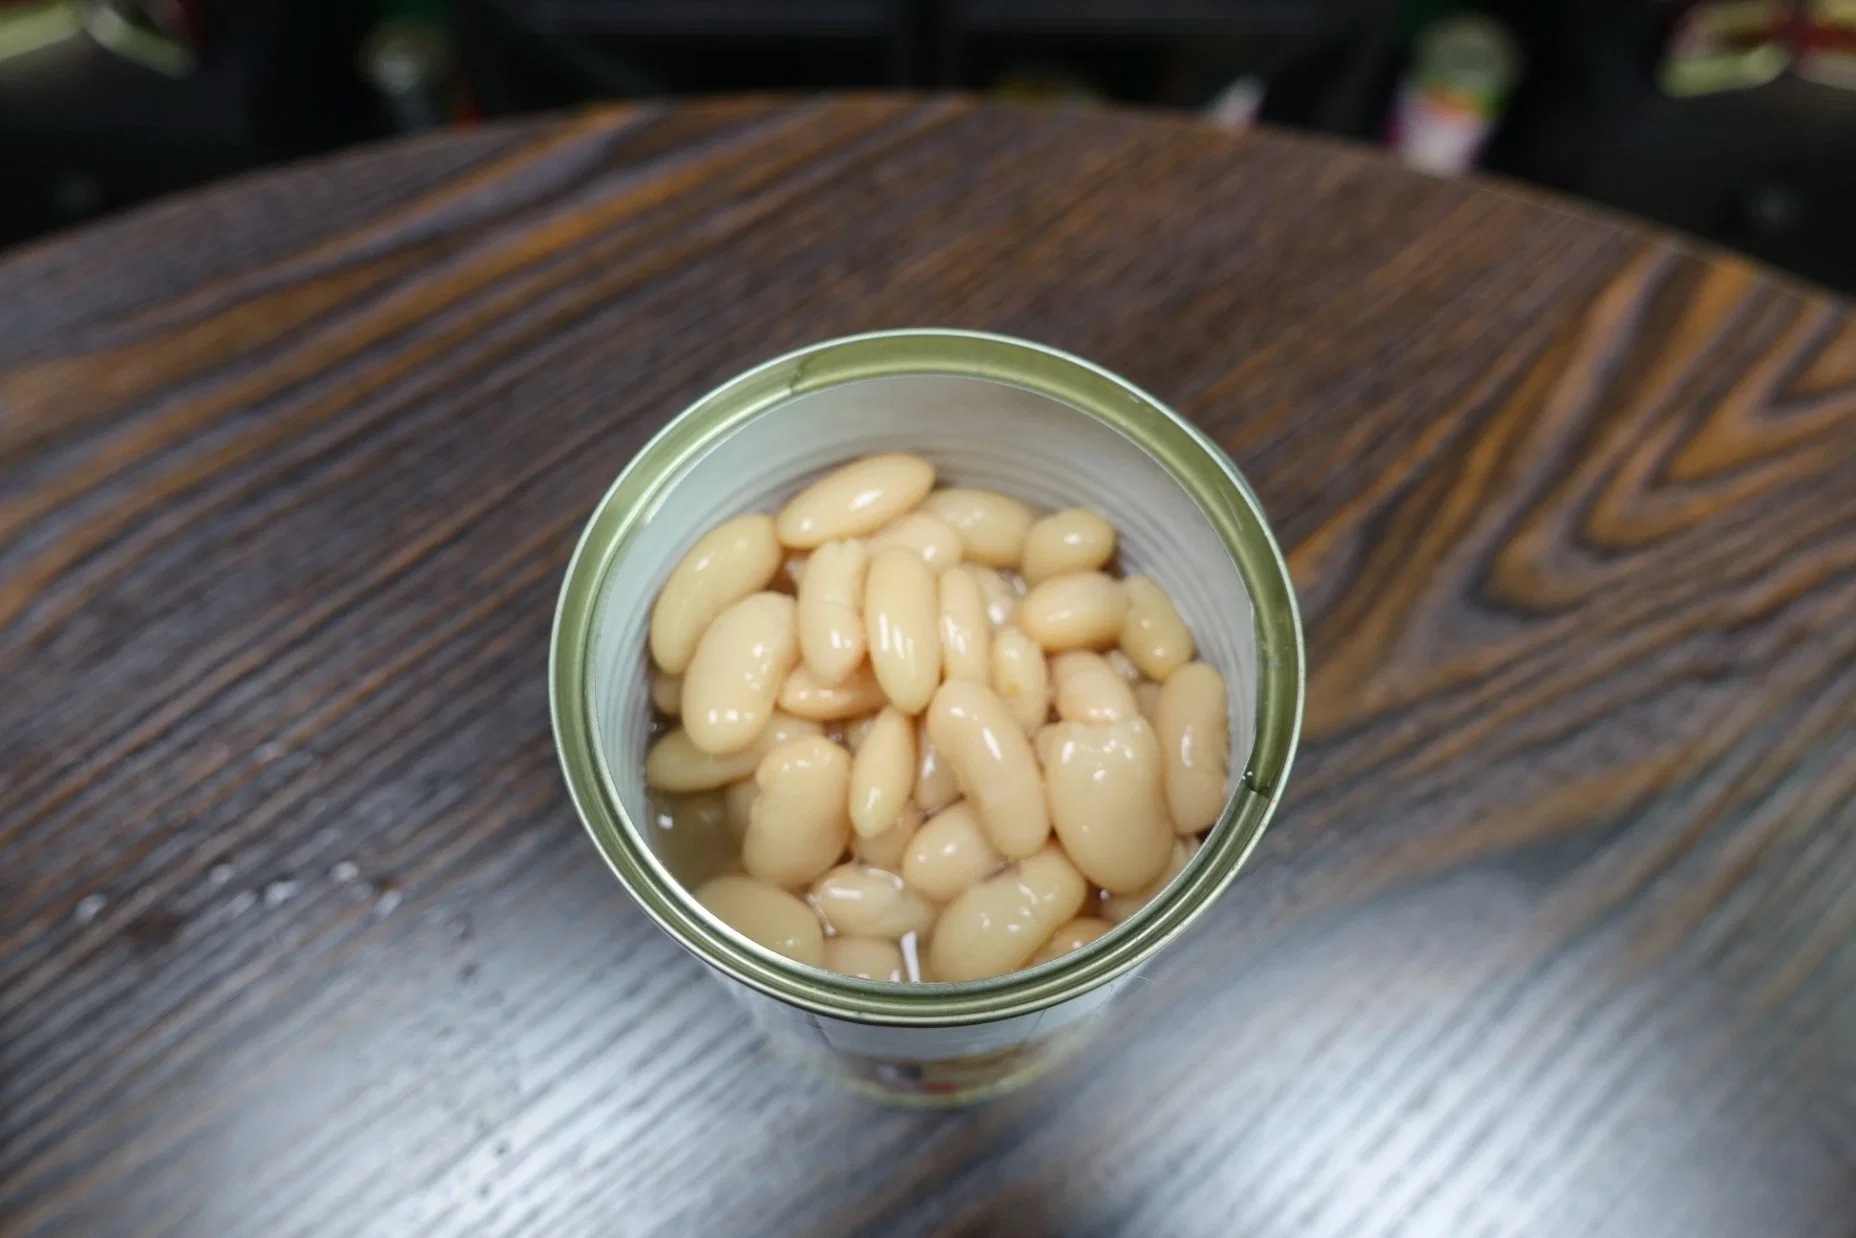 400g Canned White Kidney Bean in Brine with Private Label